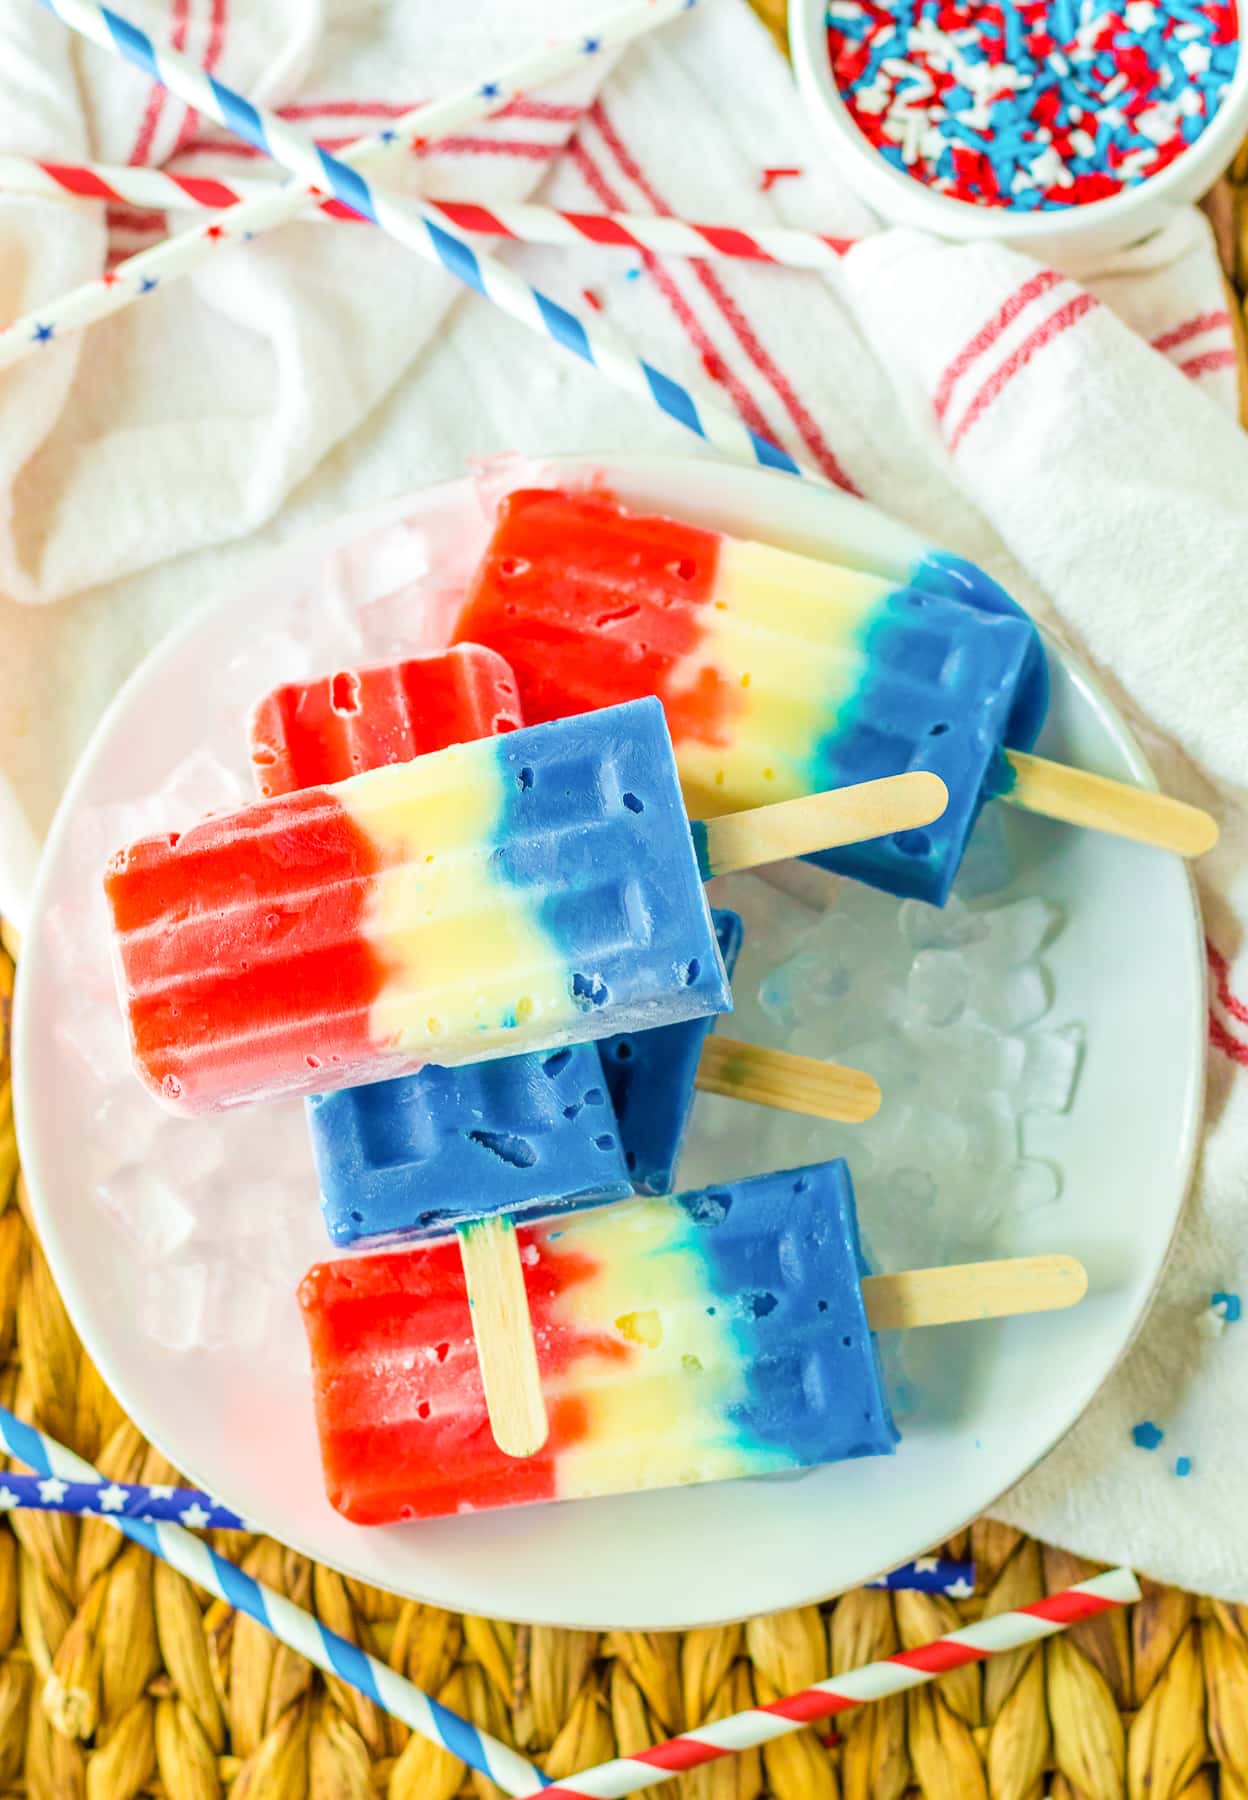 Red white and blue popsicles piled on a plate from above on a counter.